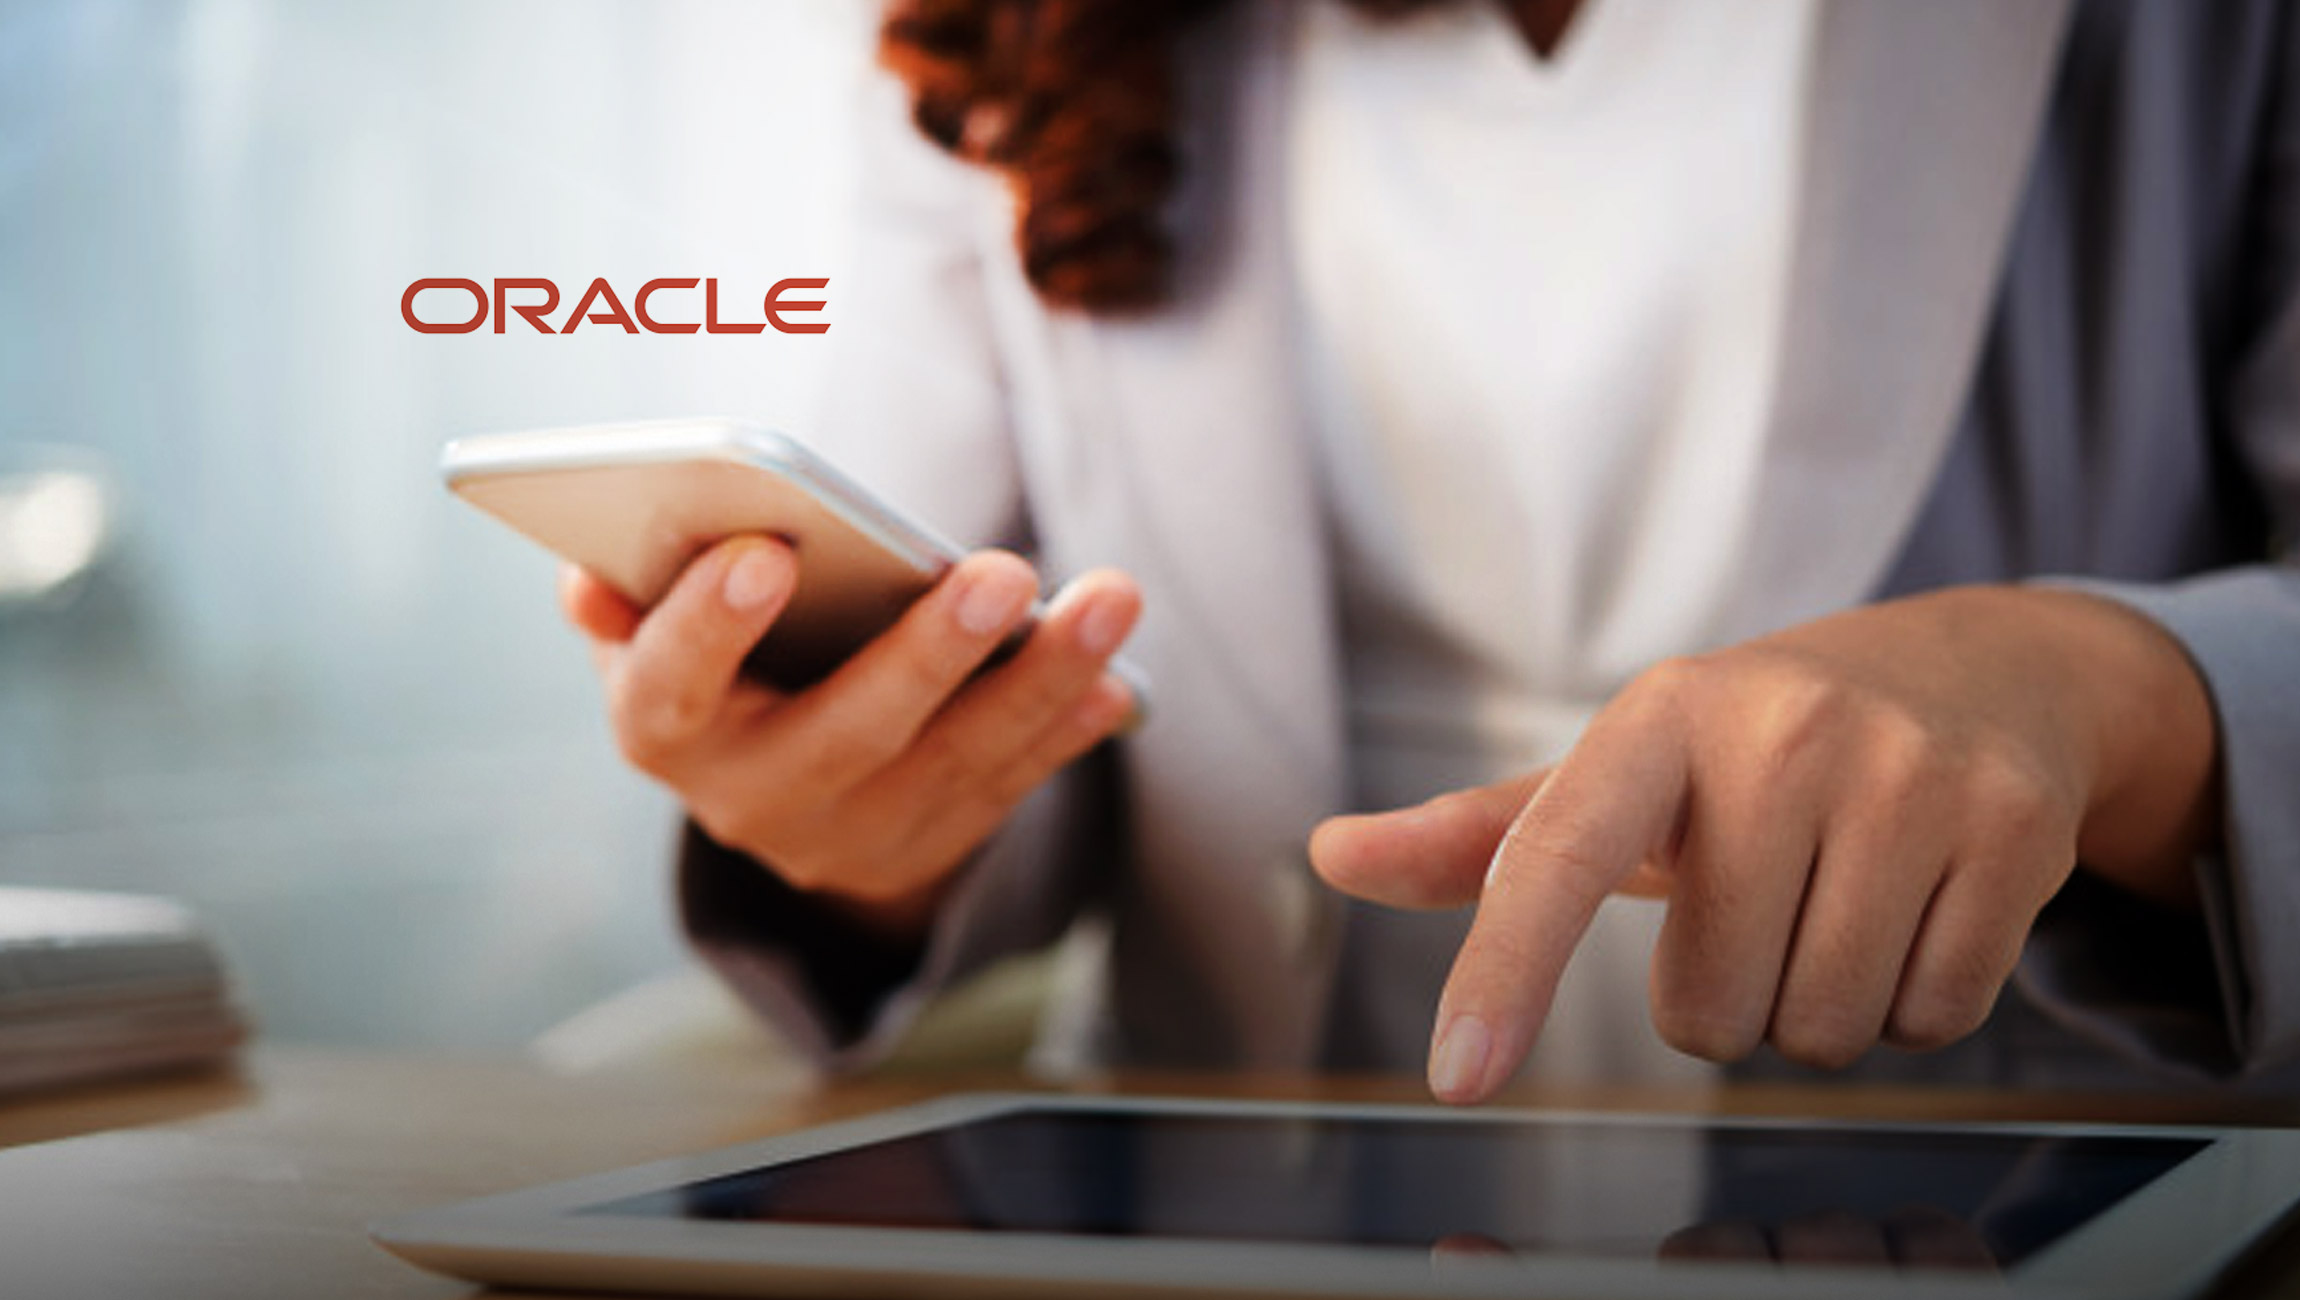 Telenor Monetizes Fast Growing Mobile Services with Oracle